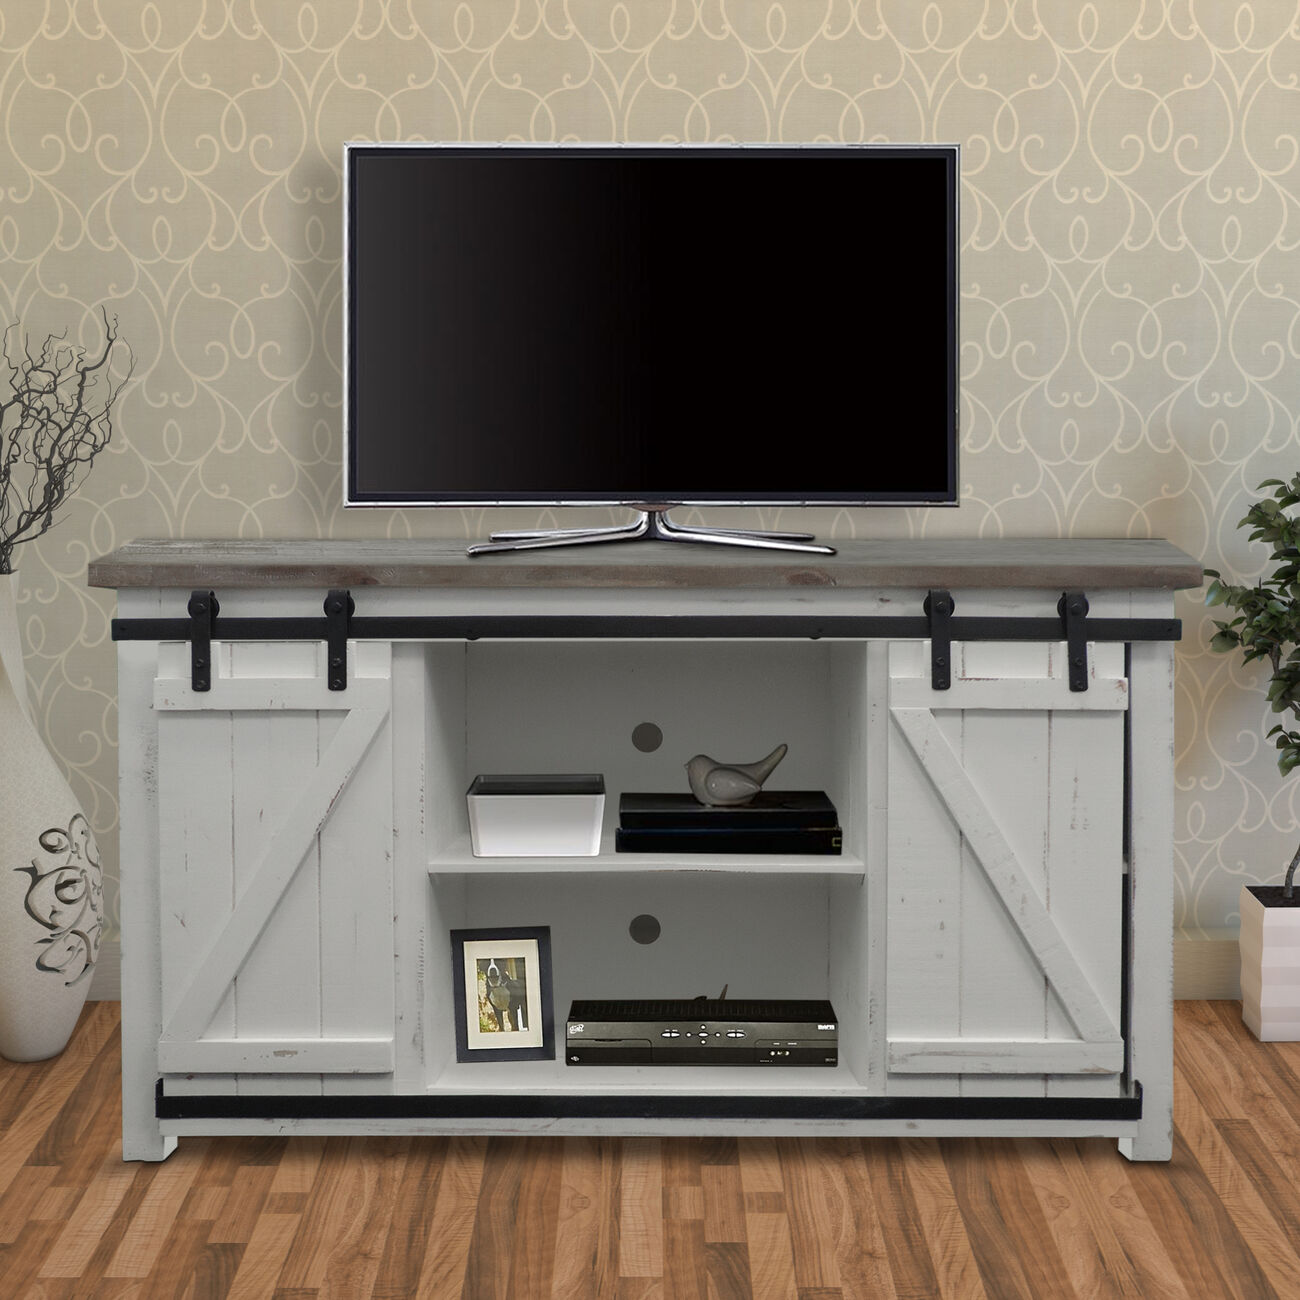 69 Inch Wooden Media Console with Barn Style Sliding Door, Brown and White